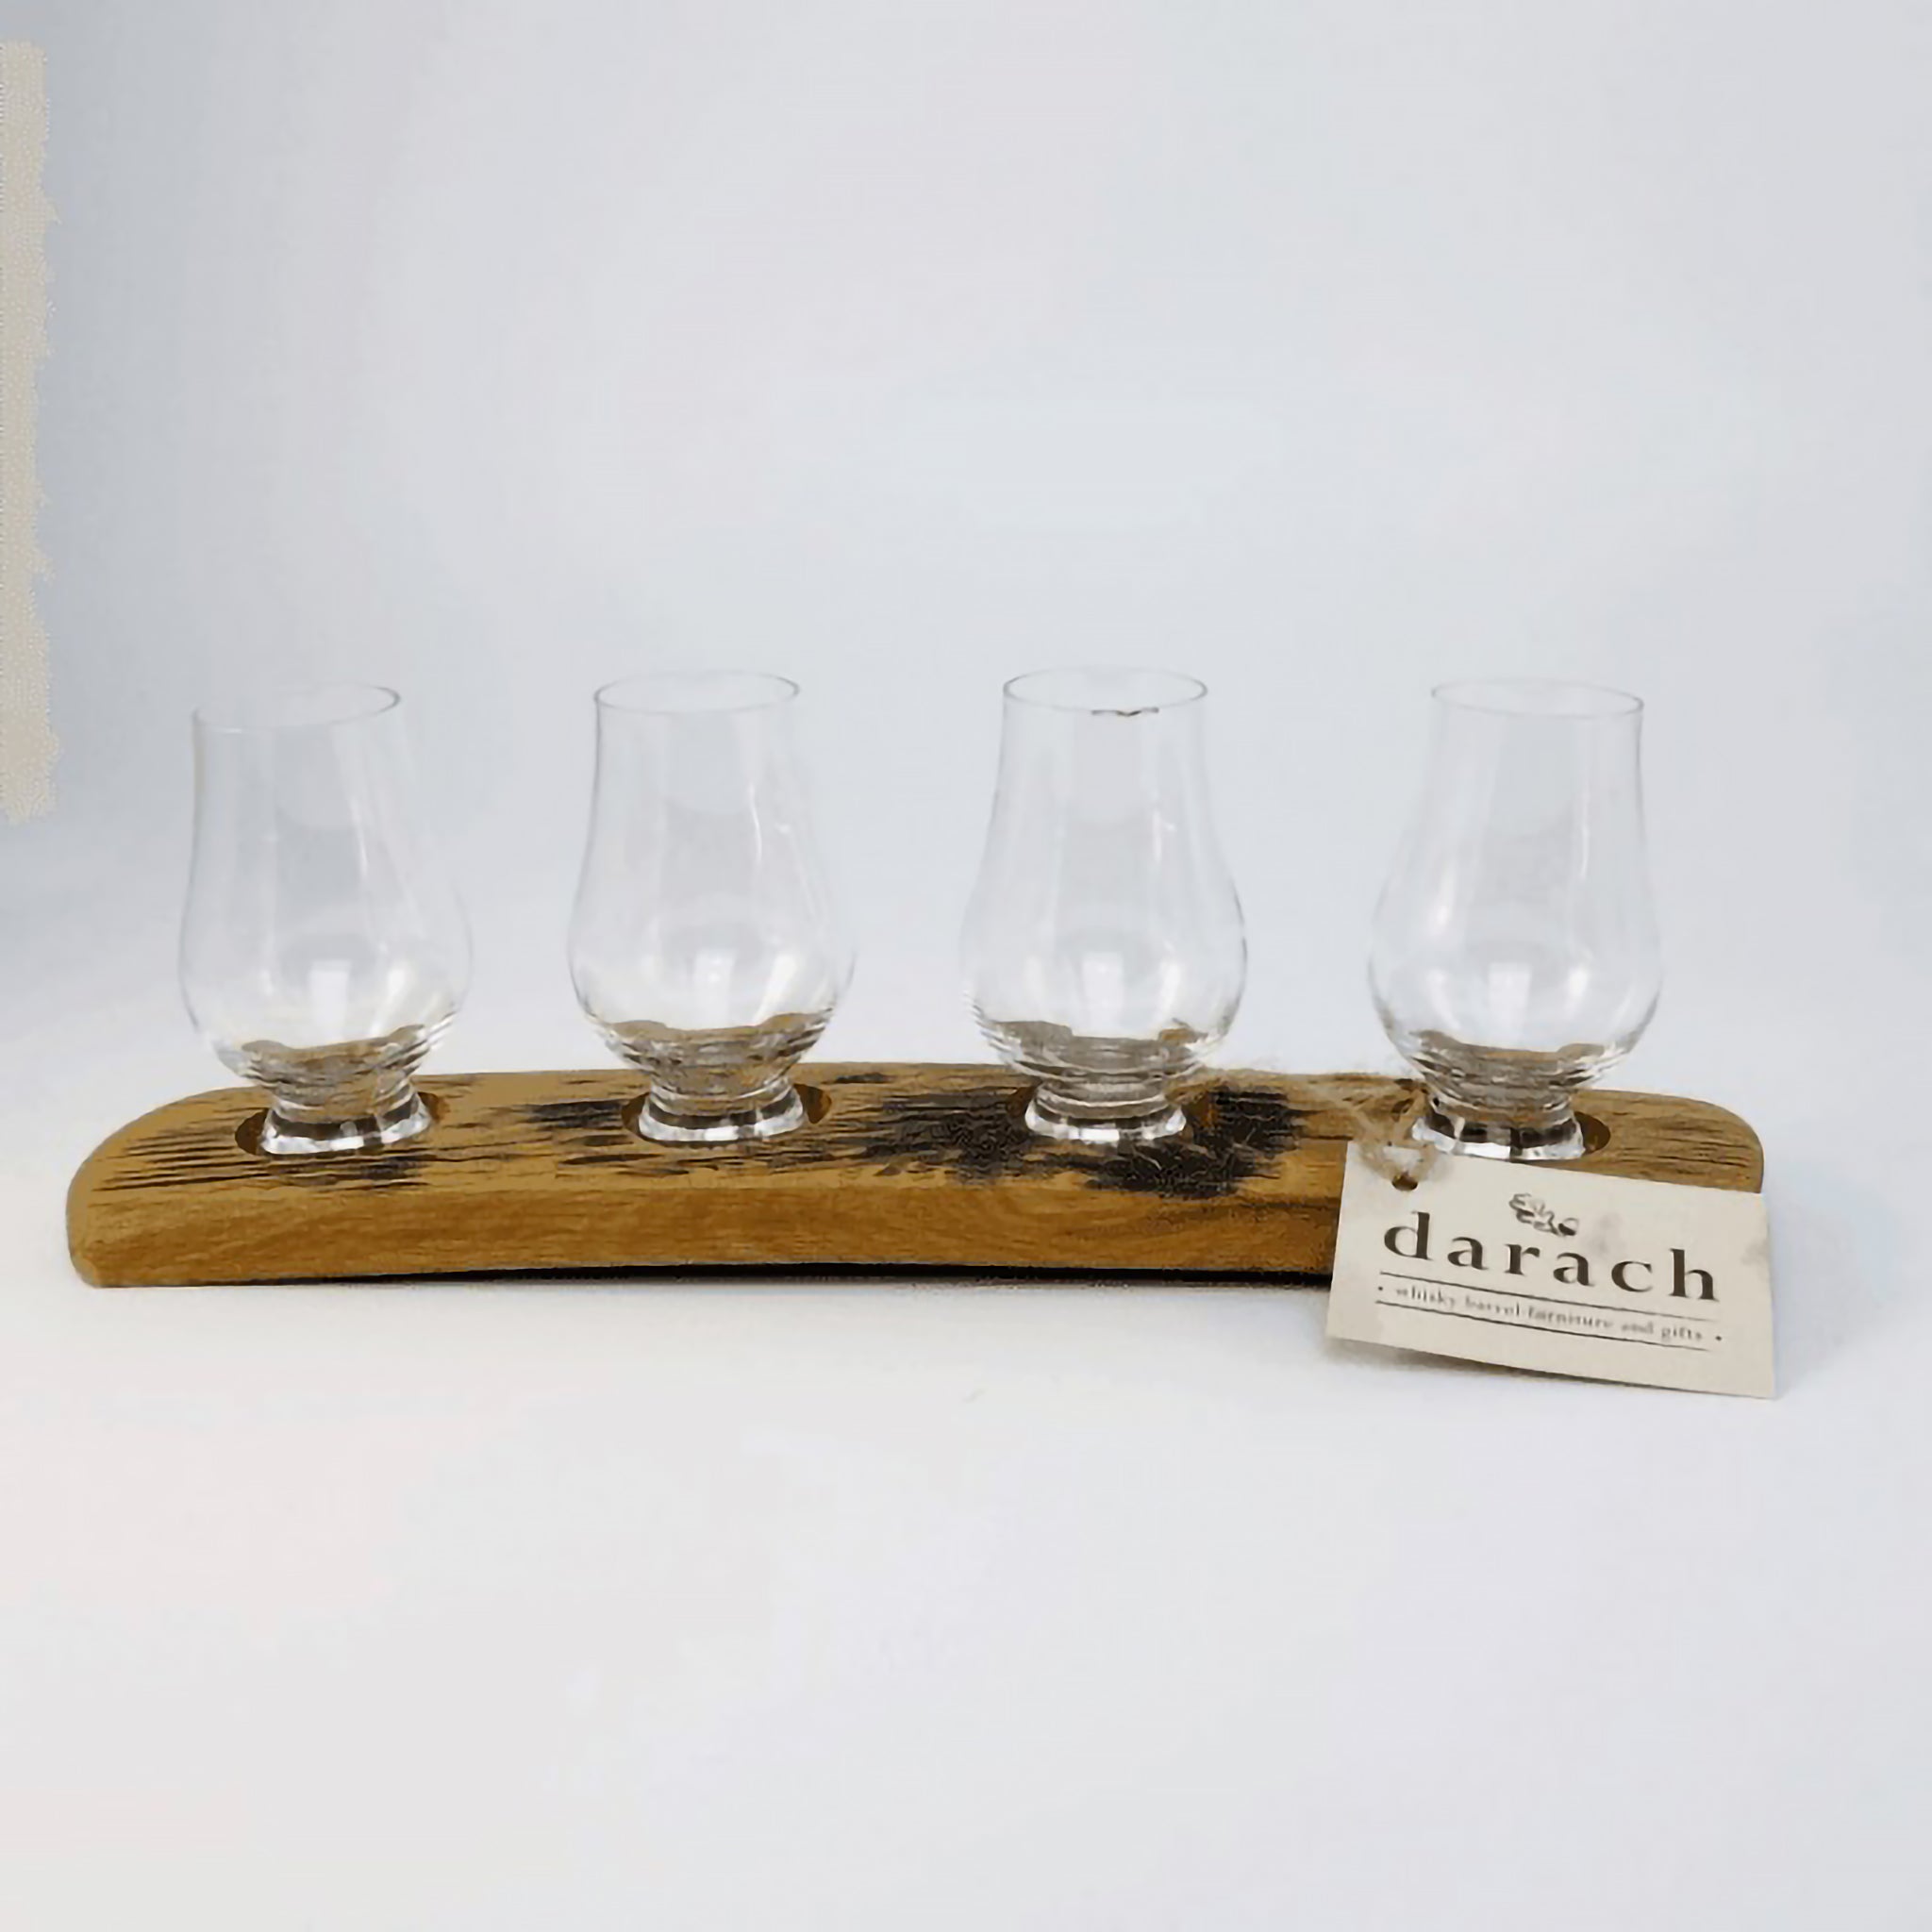 Four nosing whisky glasses on wooden barrel stave